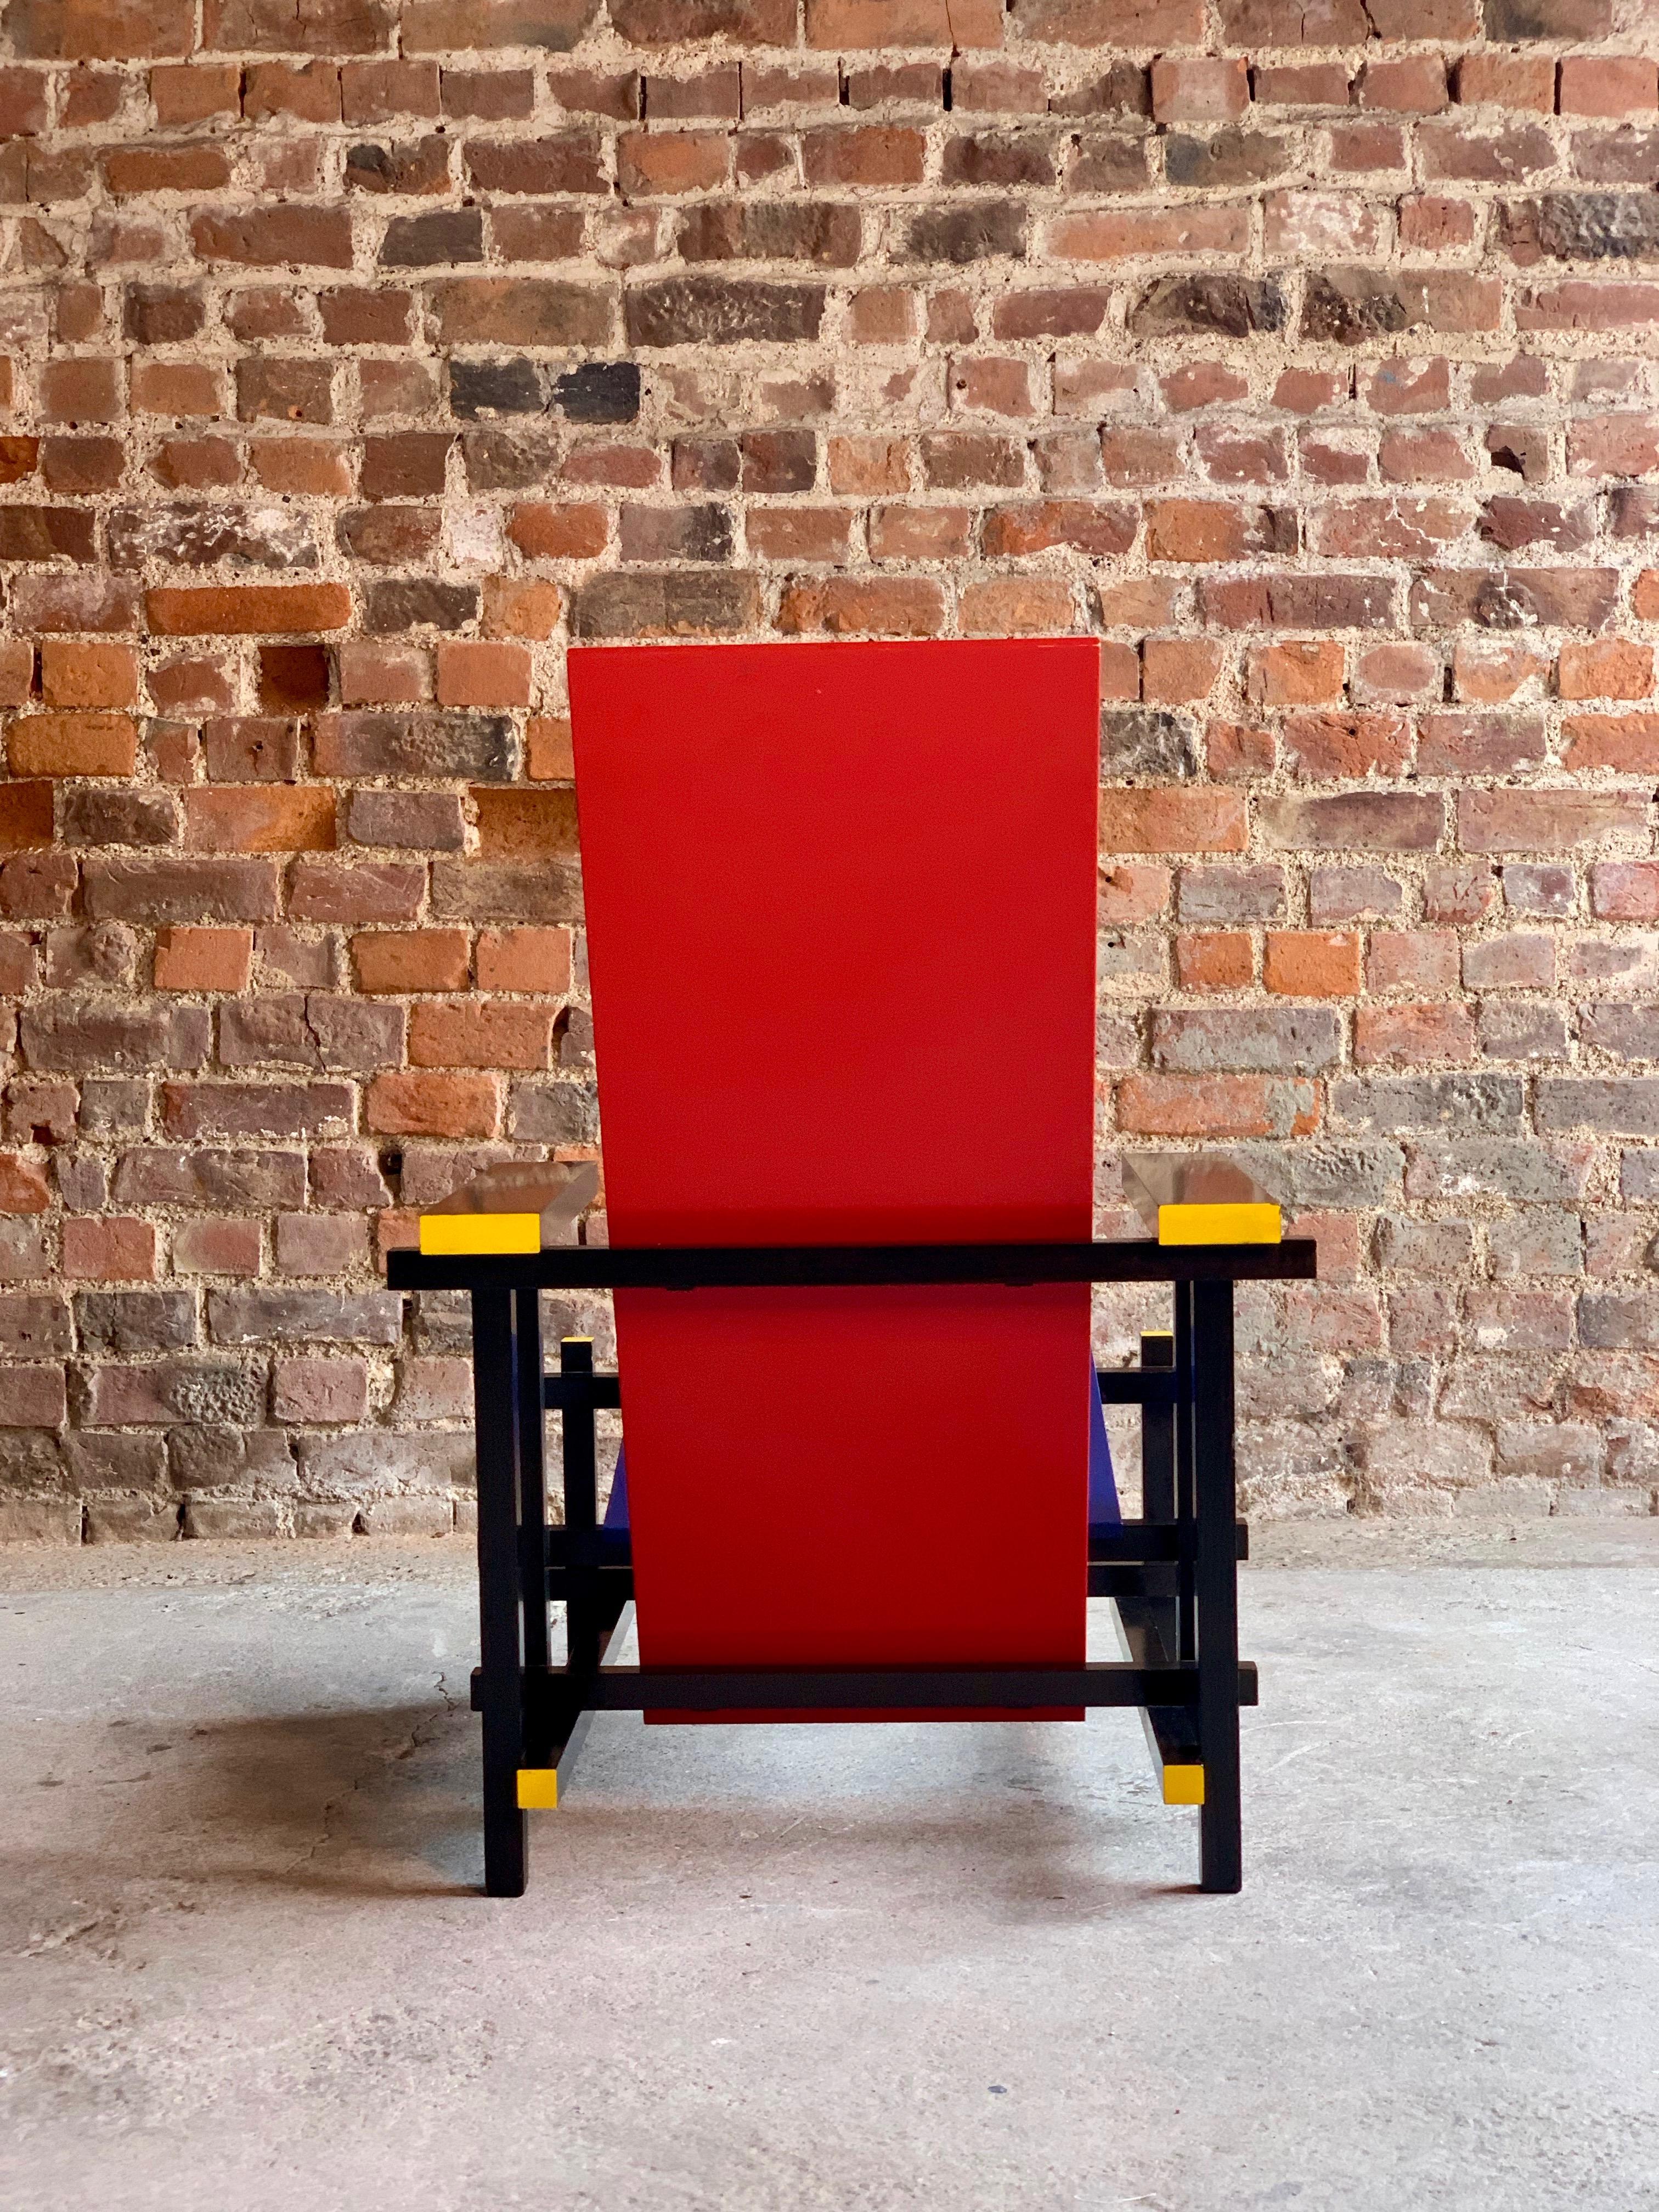 Bauhaus Cassina Red and Blue Chair by Gerrit T Rietveld Numbered 8488, Italy, circa 1970